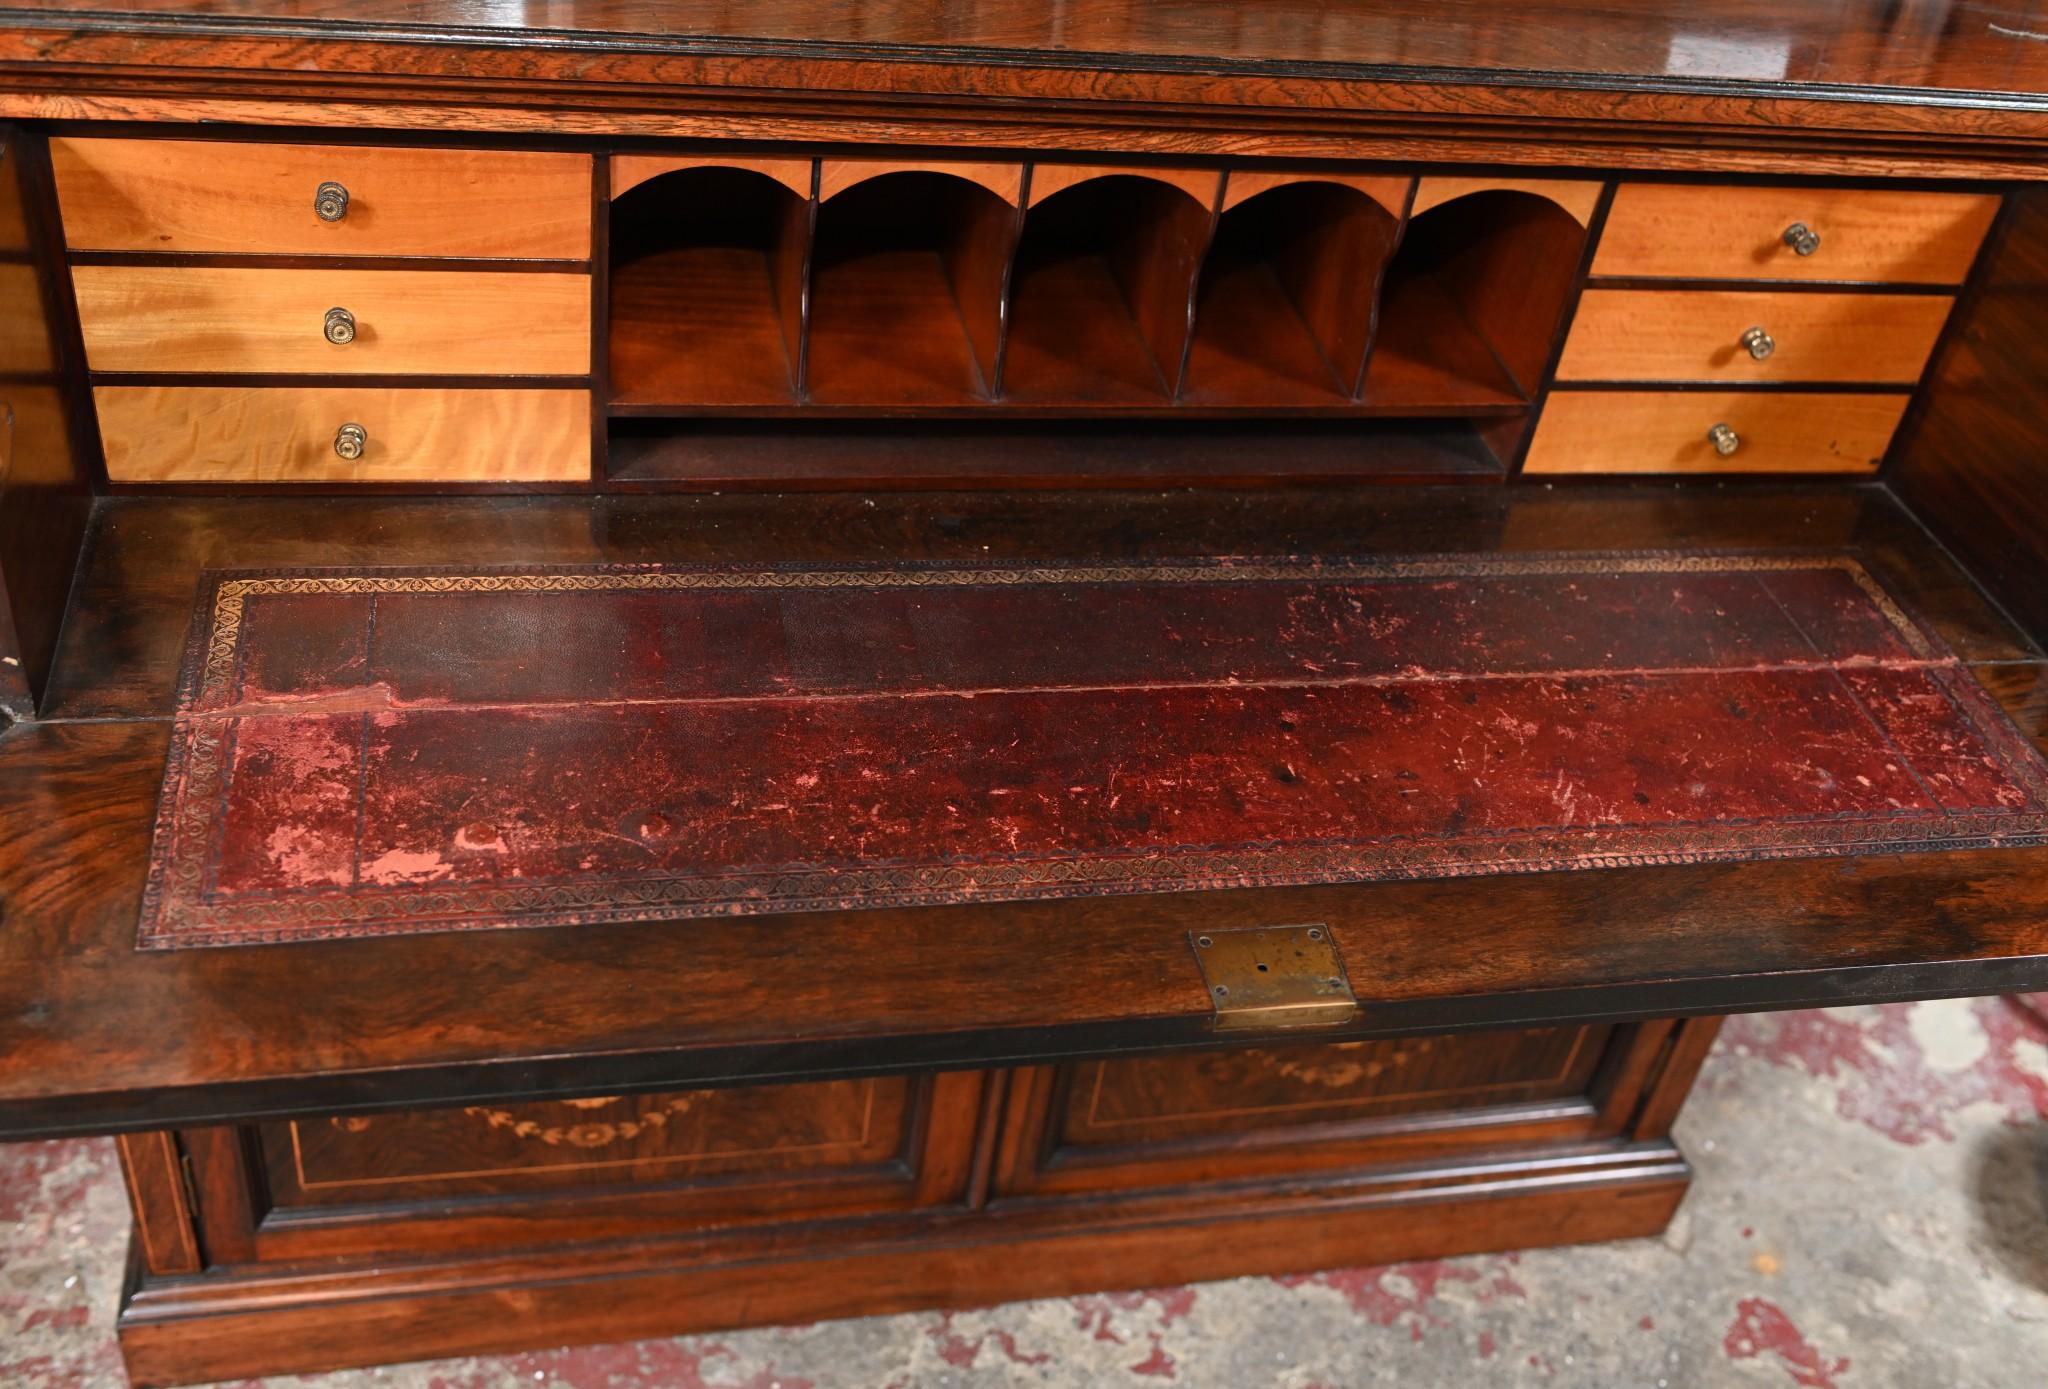 Stunning Regency Revival secretaire bookcase in mahogany
Grand piece of furniture with middle section opening out to reveal desk area 
Features a red tooled leather writing surface and various cubby holes and drawers
Inlay work is incredible